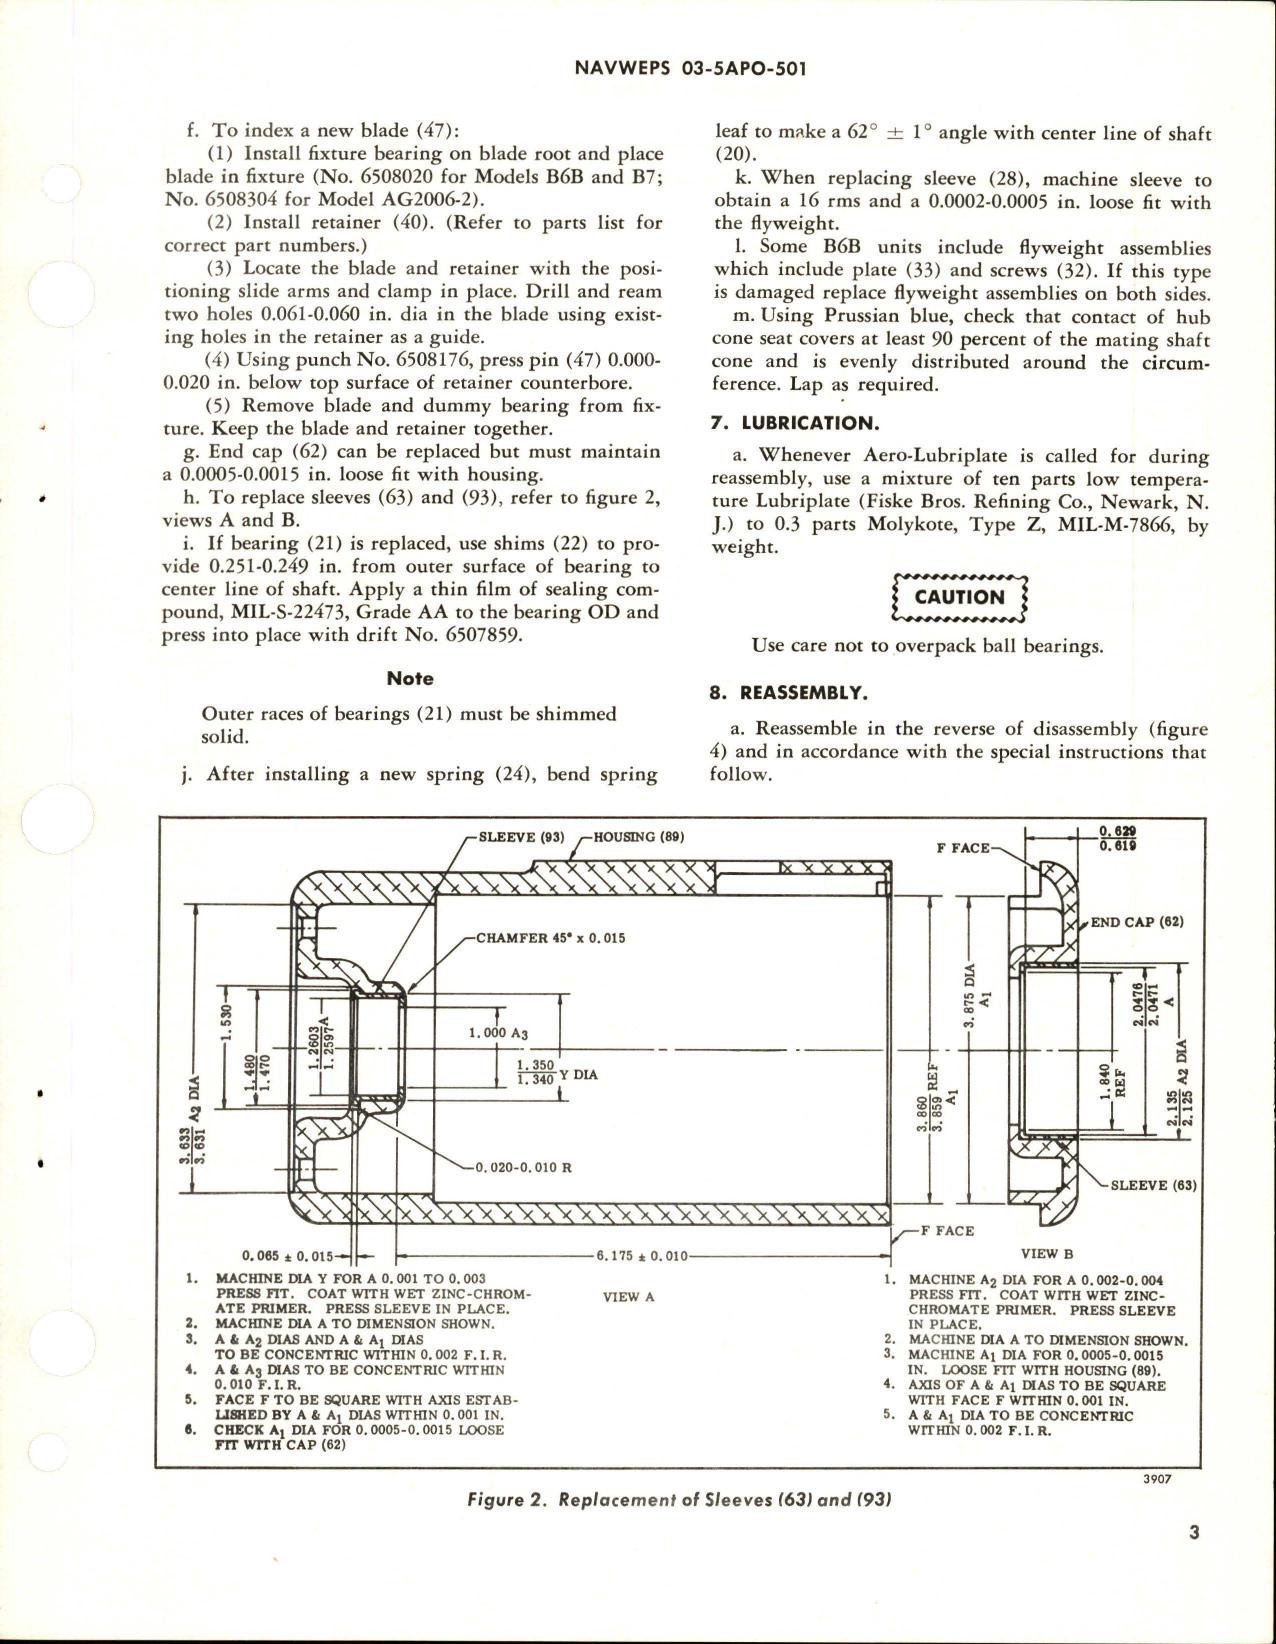 Sample page 5 from AirCorps Library document: Overhaul Instructions with Illustrated Parts Breakdown for Air Driven Generator Assembly - Parts 6509402, 6505115, and 6522875